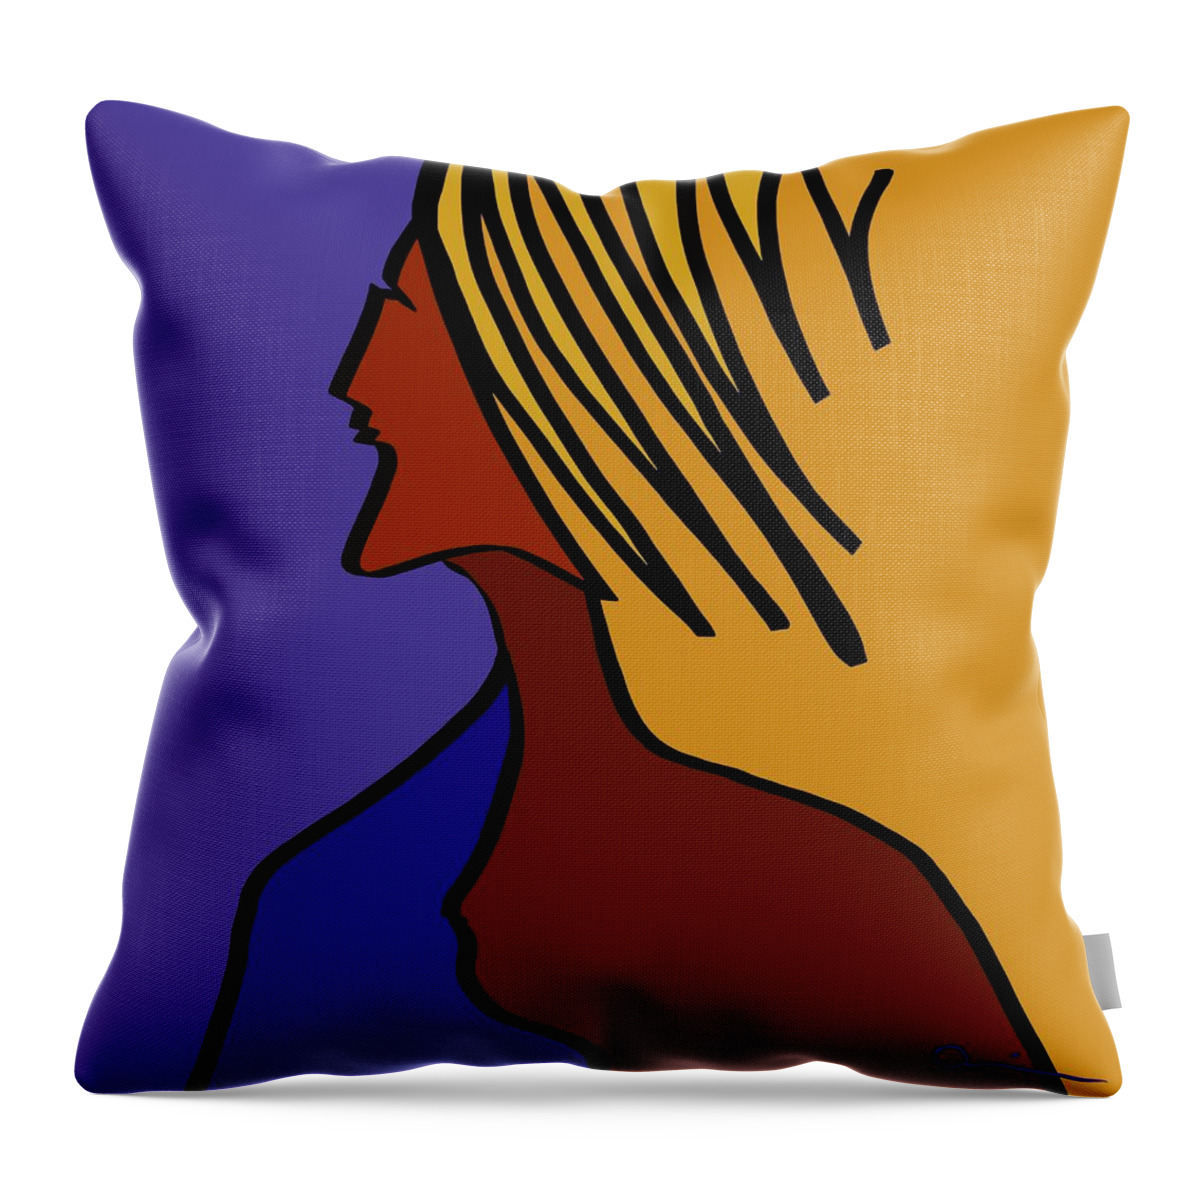 Woman Throw Pillow featuring the digital art Red Woman by Jeffrey Quiros